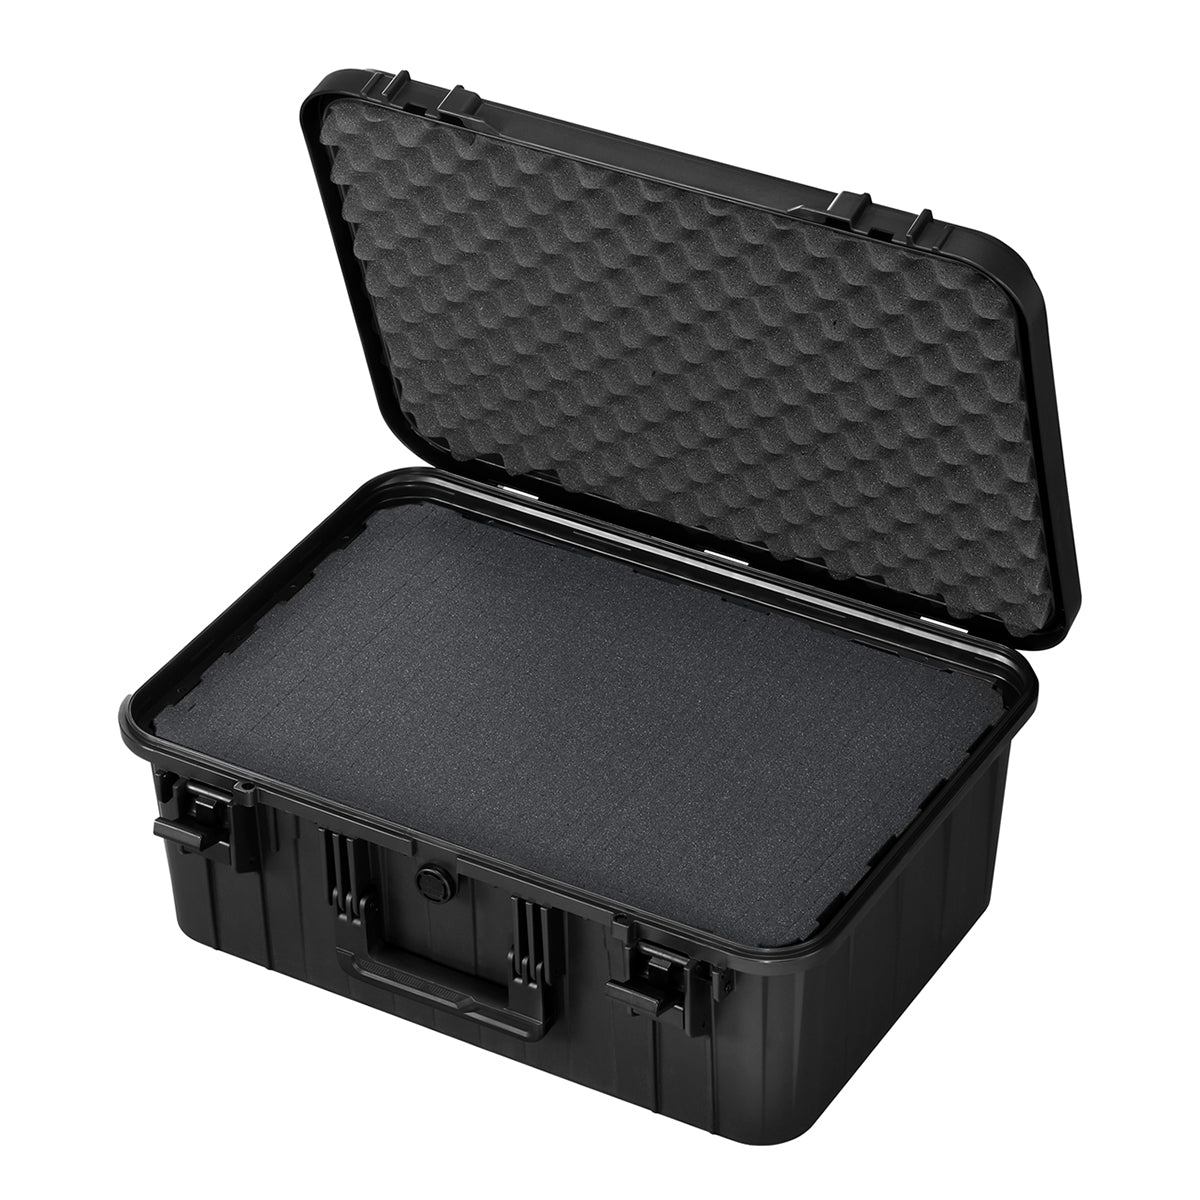 SP ECO 90DS Black Carry Case, Cubed Foam, ID: L520xW350xH220mm